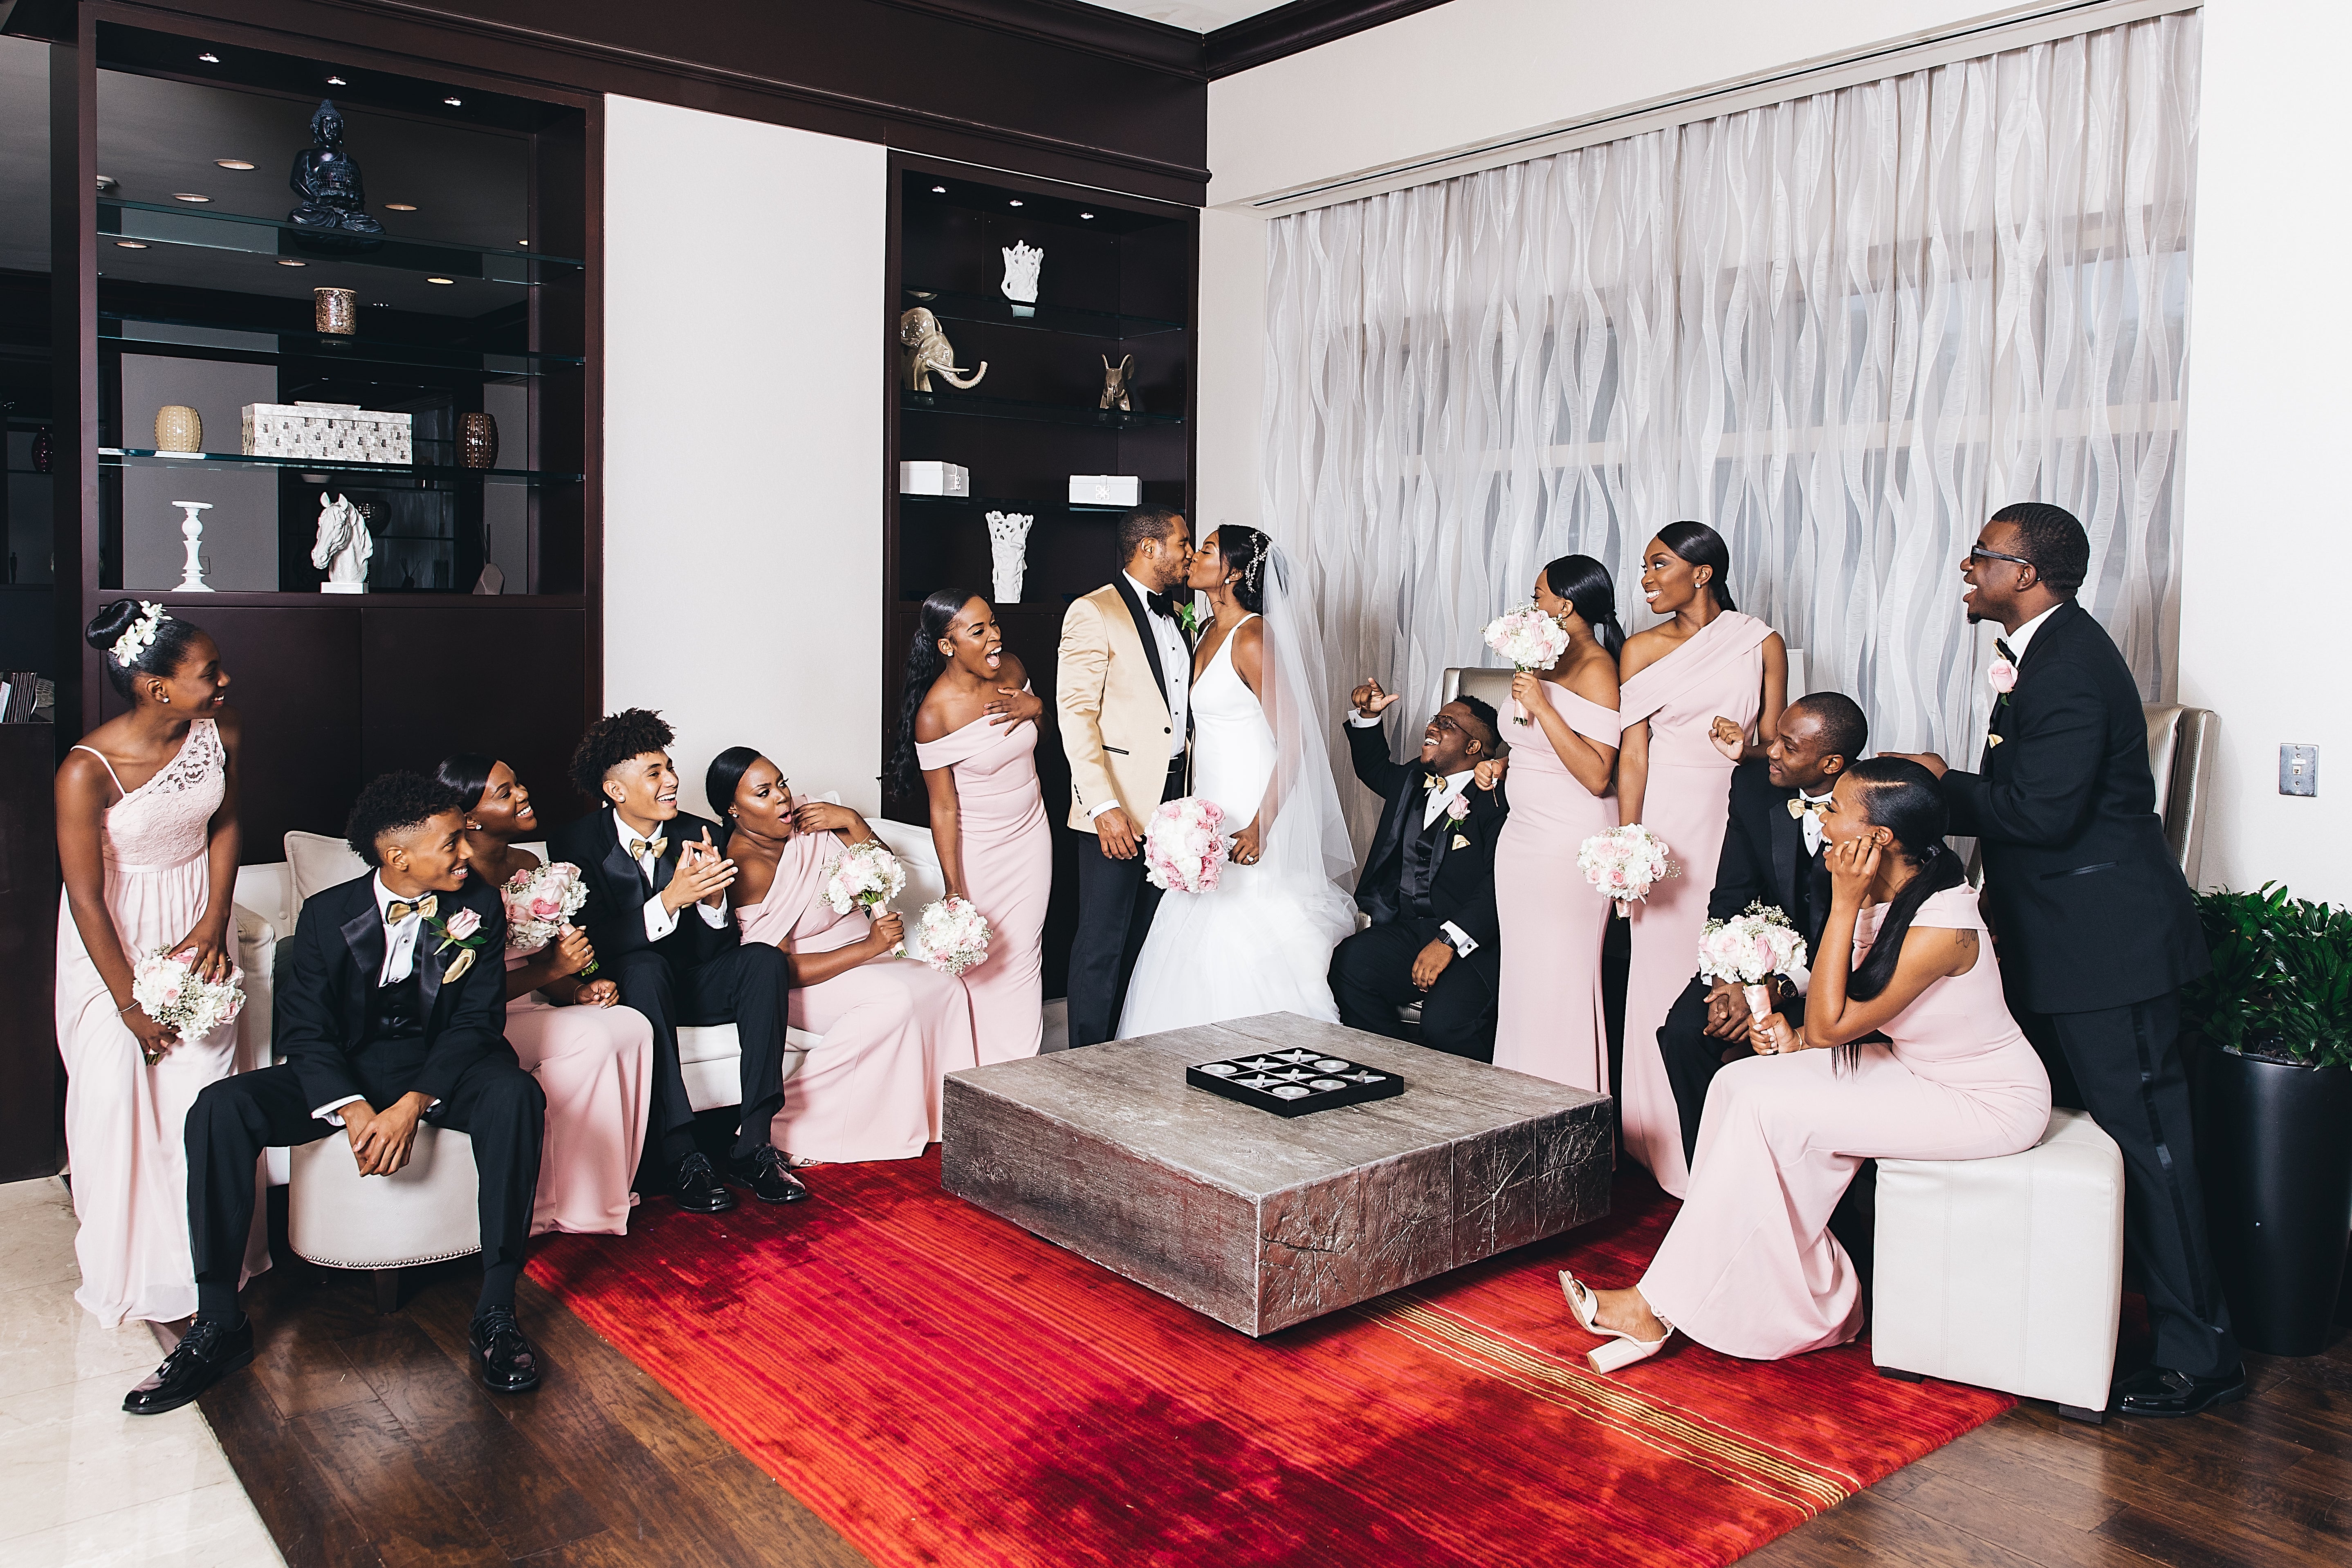 Bridal Bliss: Chavez And Reneé Went All Out For Their Romantic Wedding Day